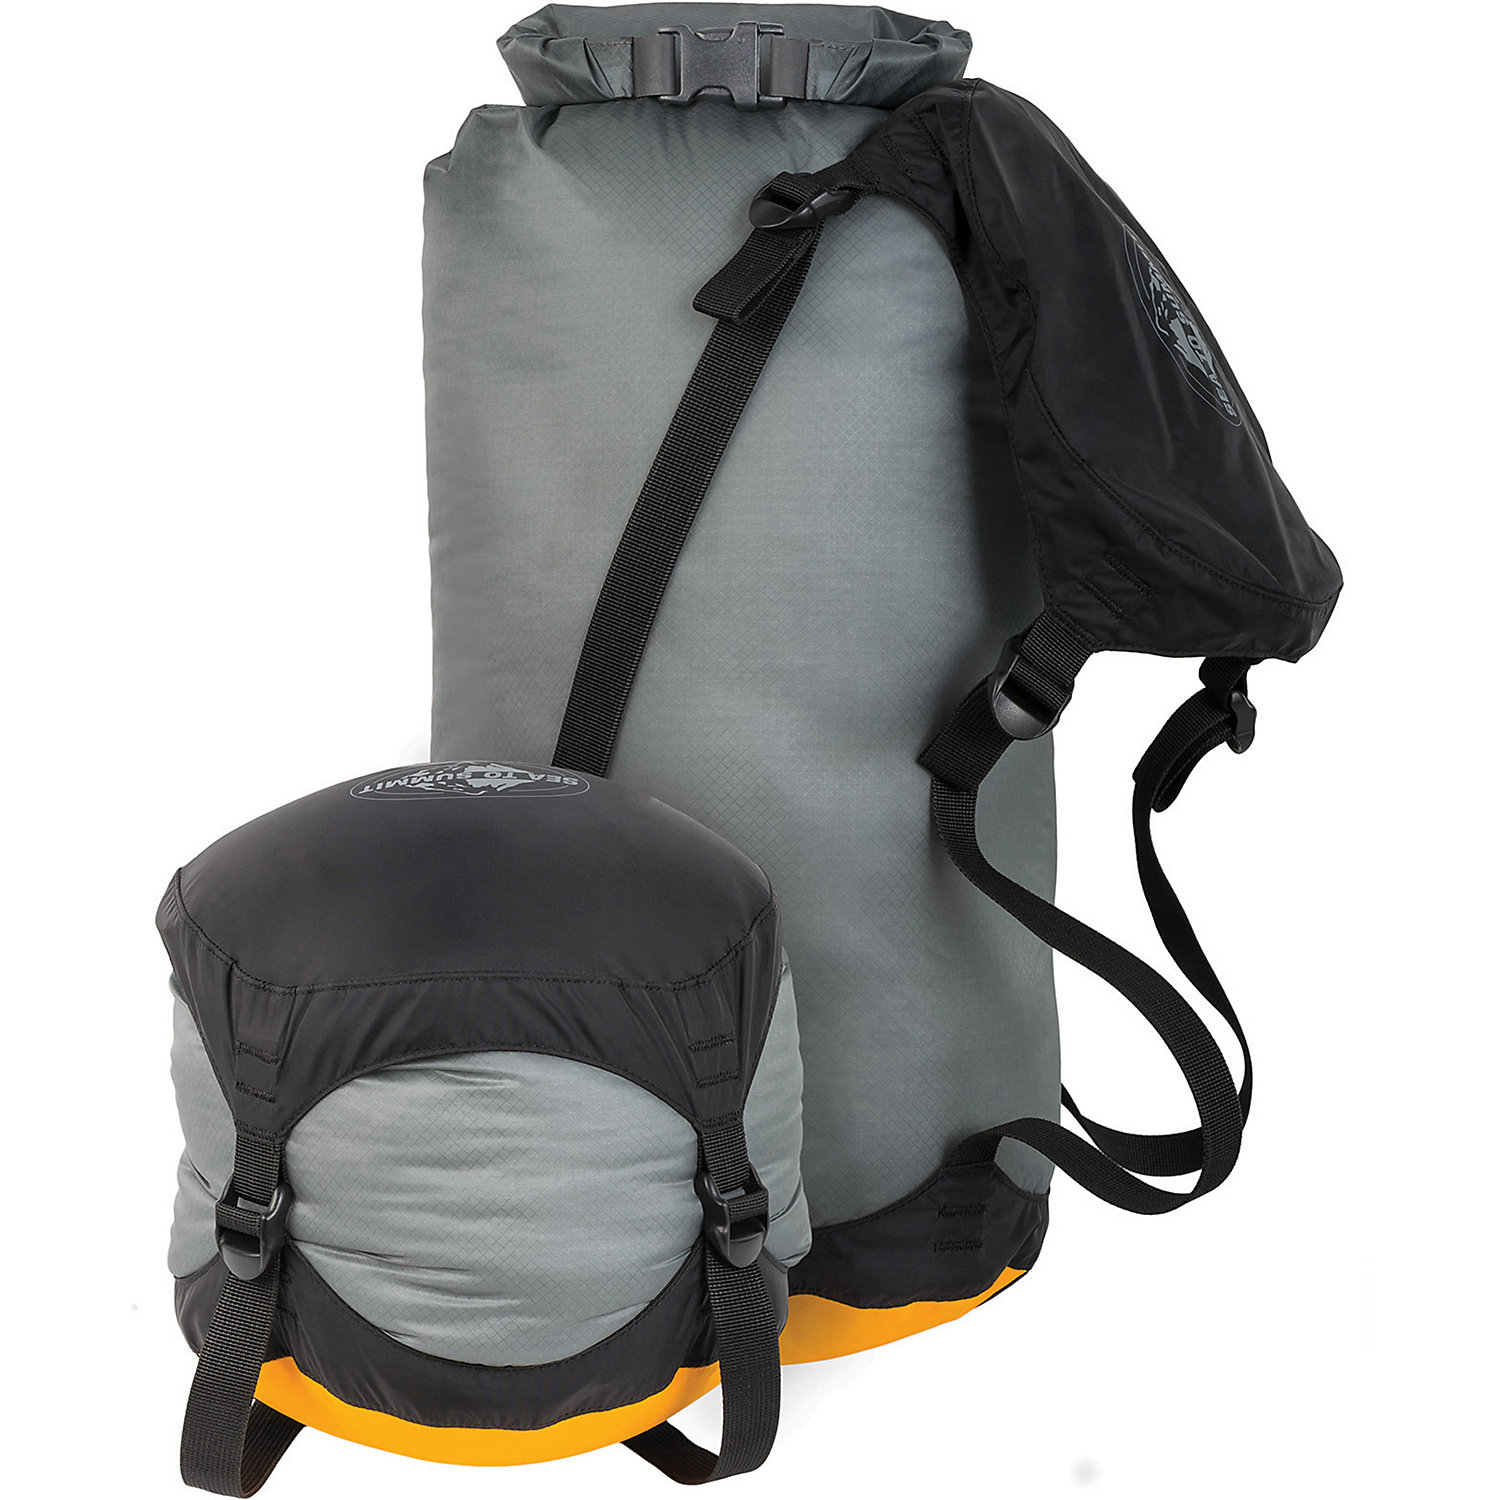 Sea to Summit eVENT Compression Dry Sack 